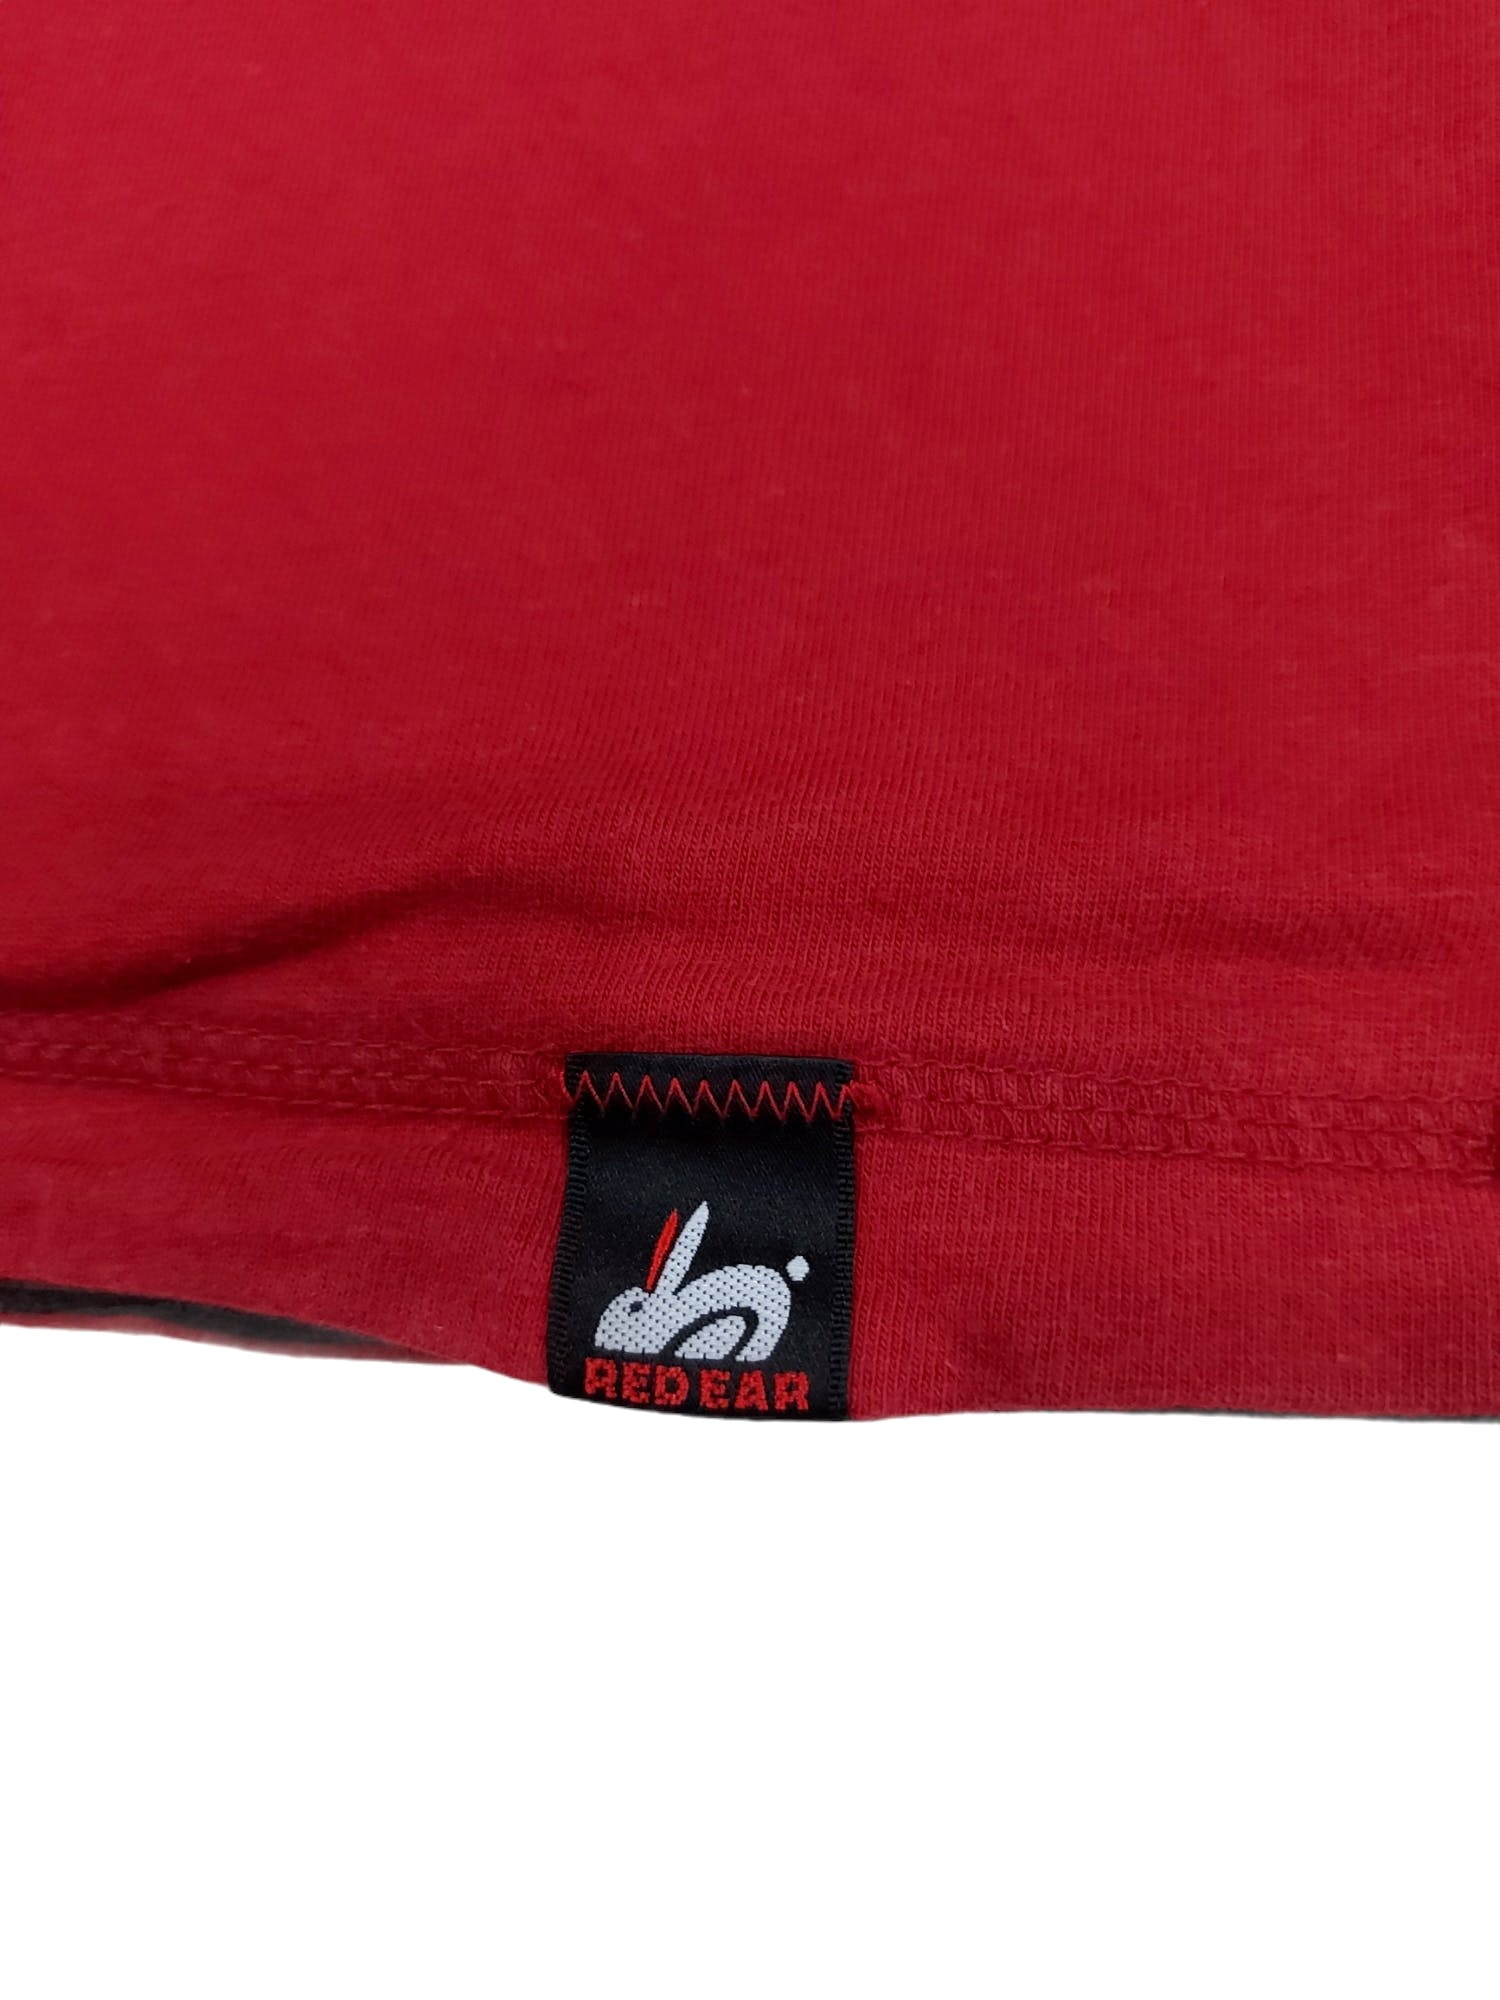 RARE! VTG PAUL SMITH RED EAR REVERSIBLE EMBROIDERED LOGO - 9